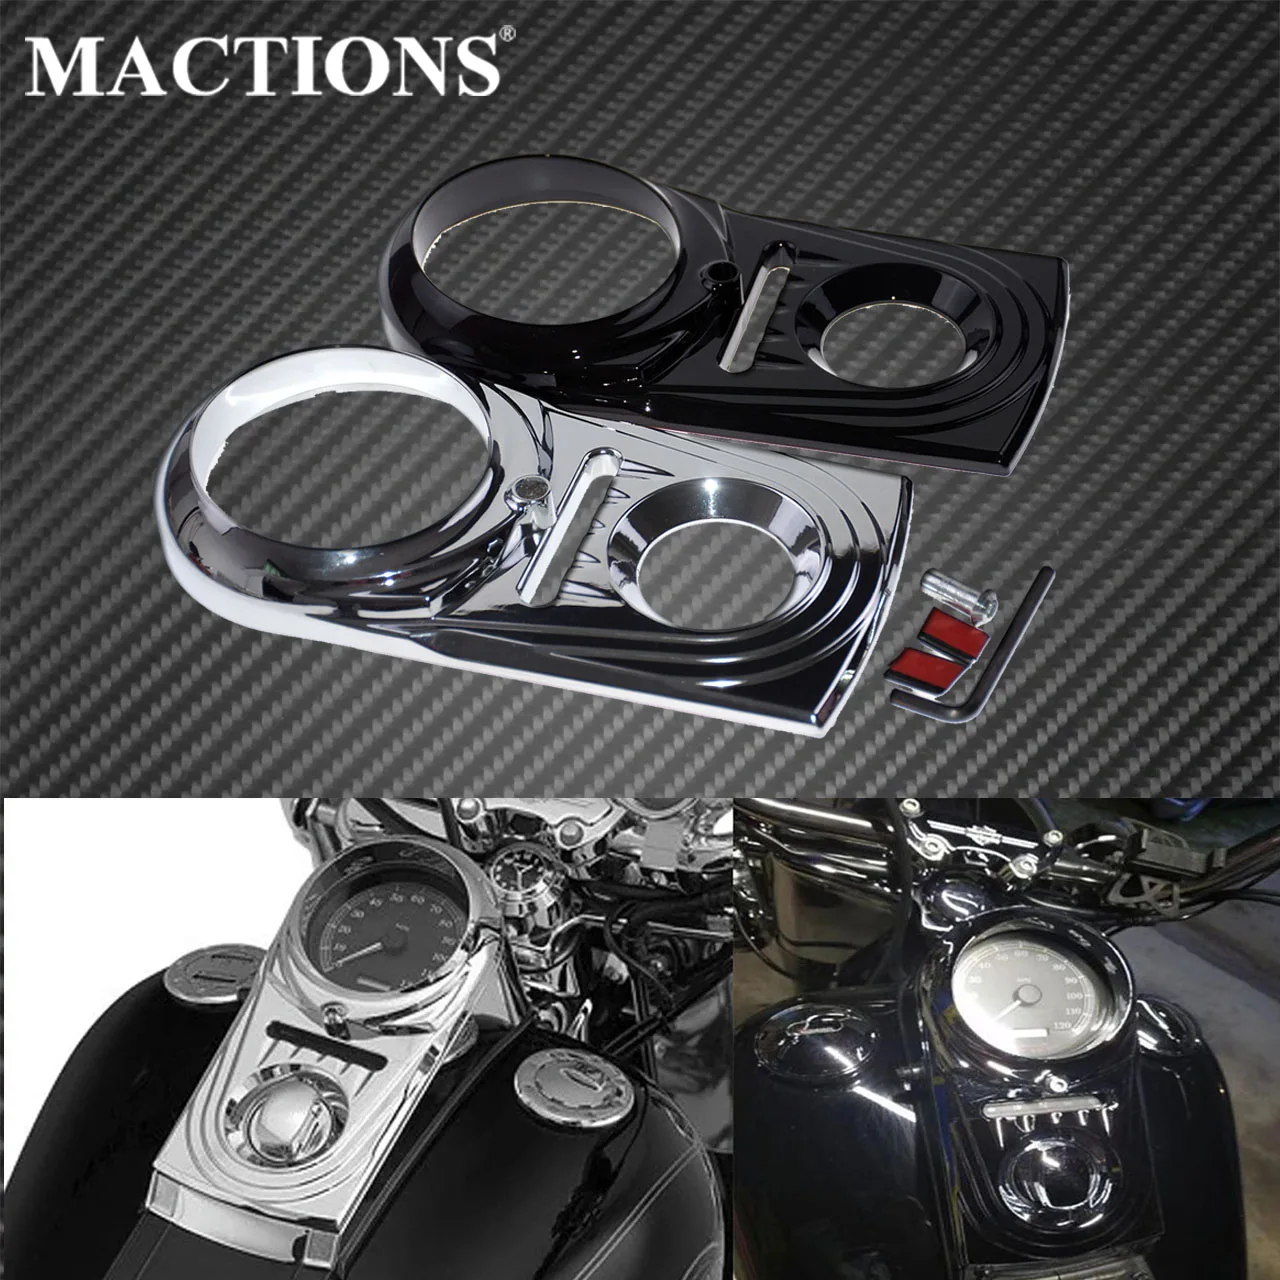 Motorcycle Fuel Gas Tank Instrument Panel Console Cover Dash Panel Insert For Harley Heritage Softail Dyna Fat Boy Lo Breakout